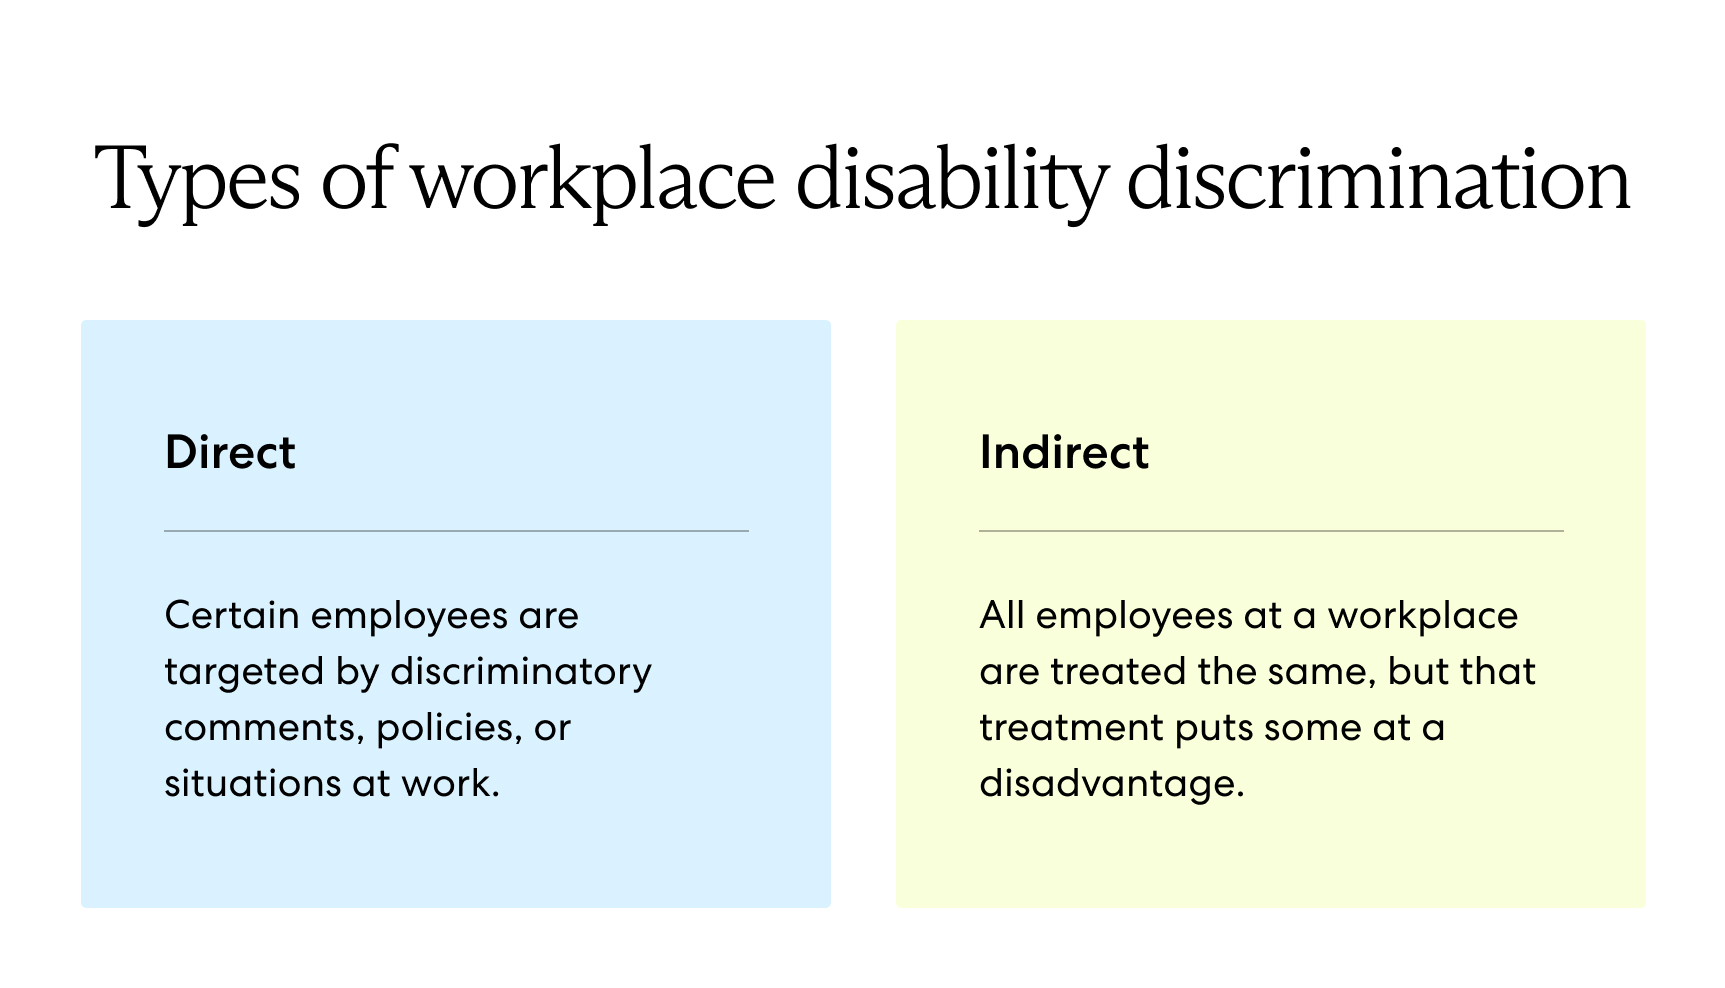 Types of workplace disability discrimination - direct and indirect